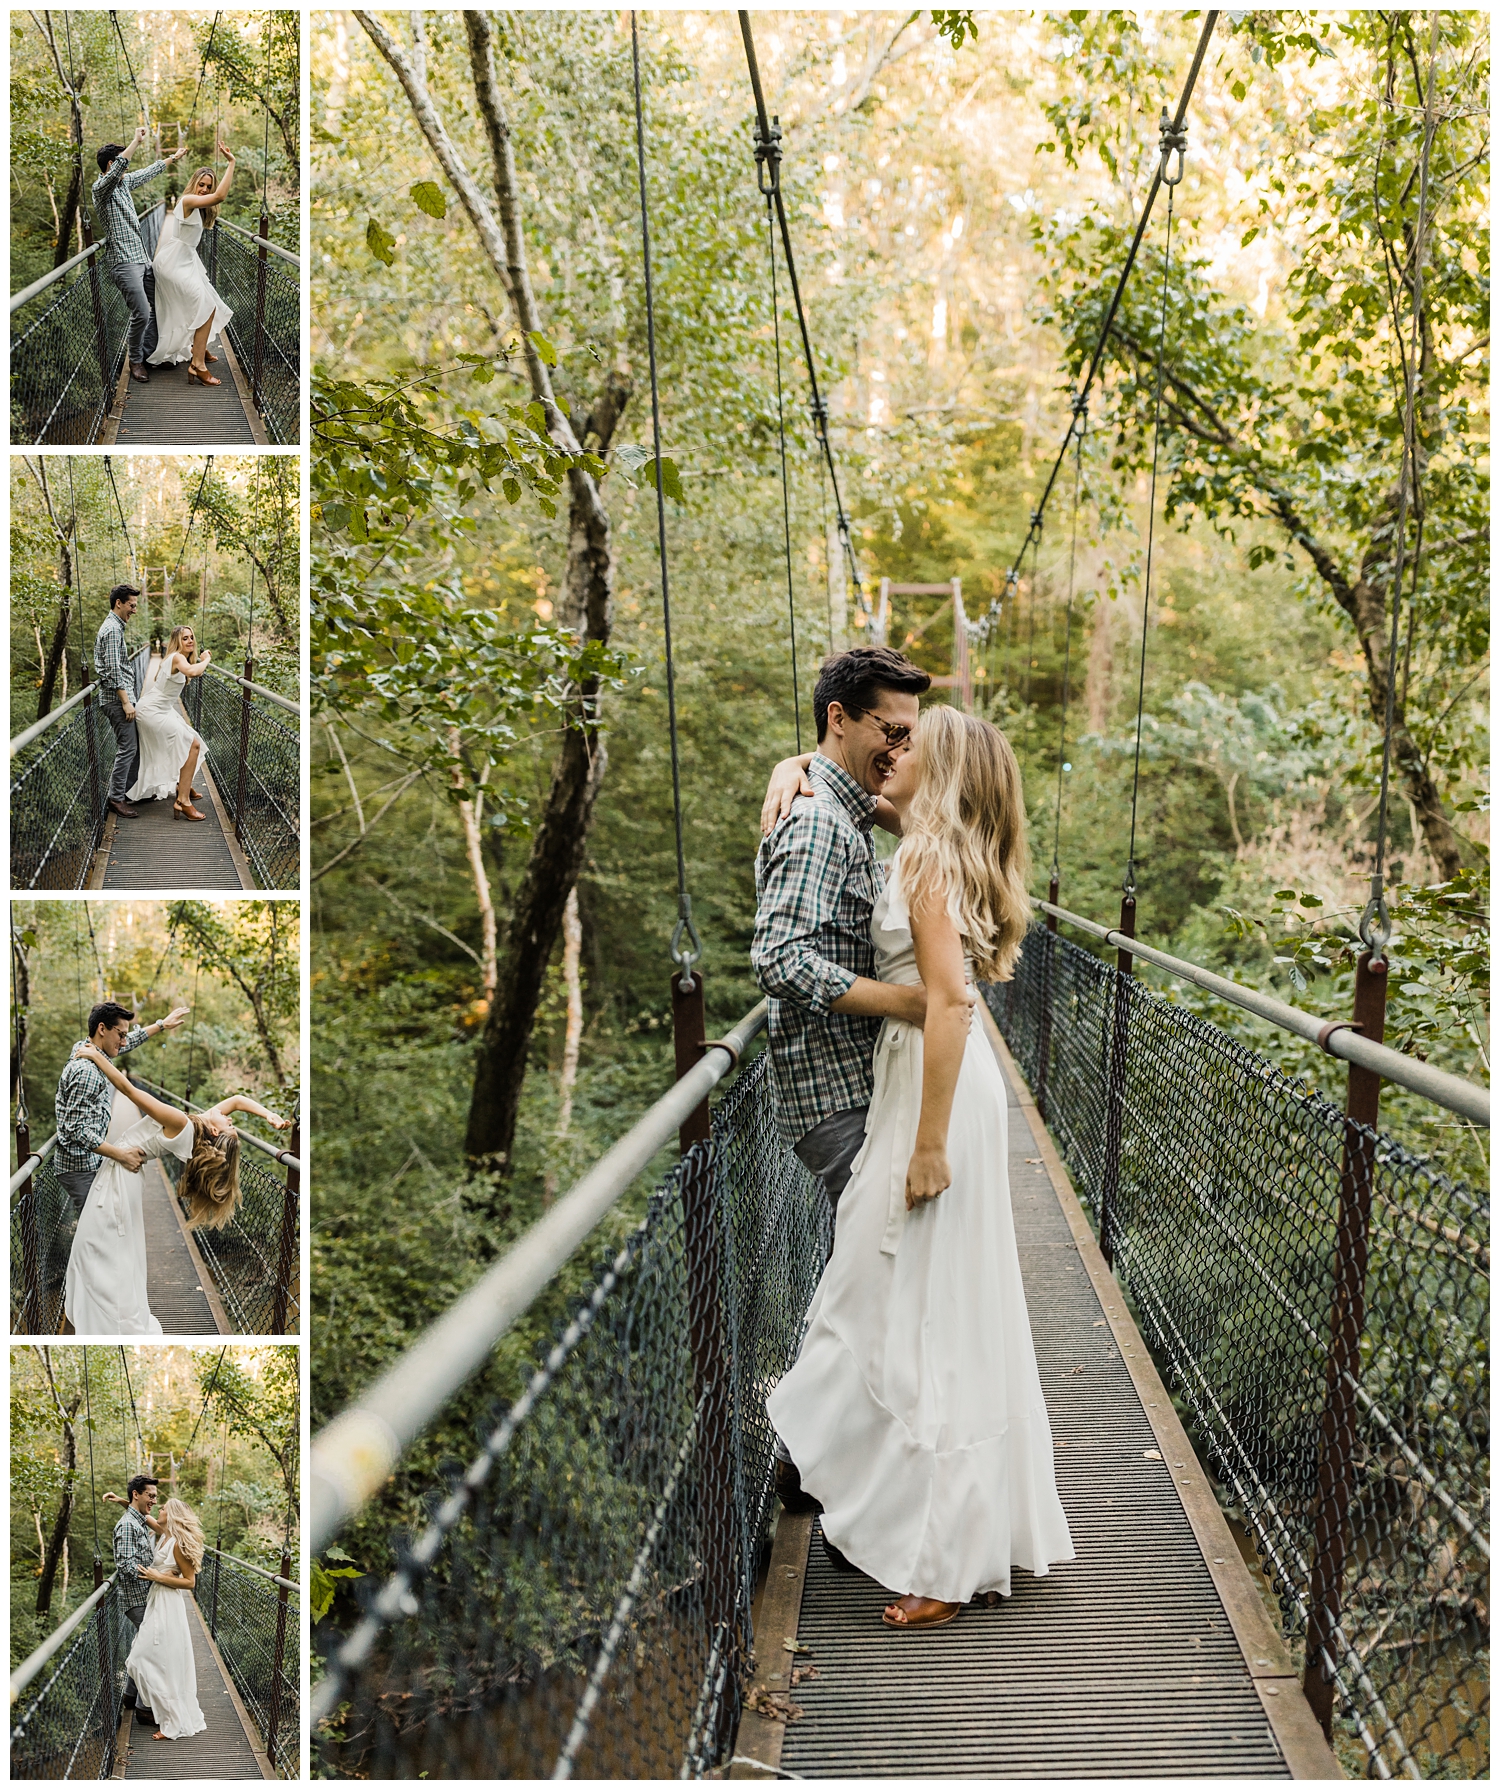 Cute, young couple dancing together on a suspension bridge during an engagement session in Lullwater Park in Atlanta, Georgia